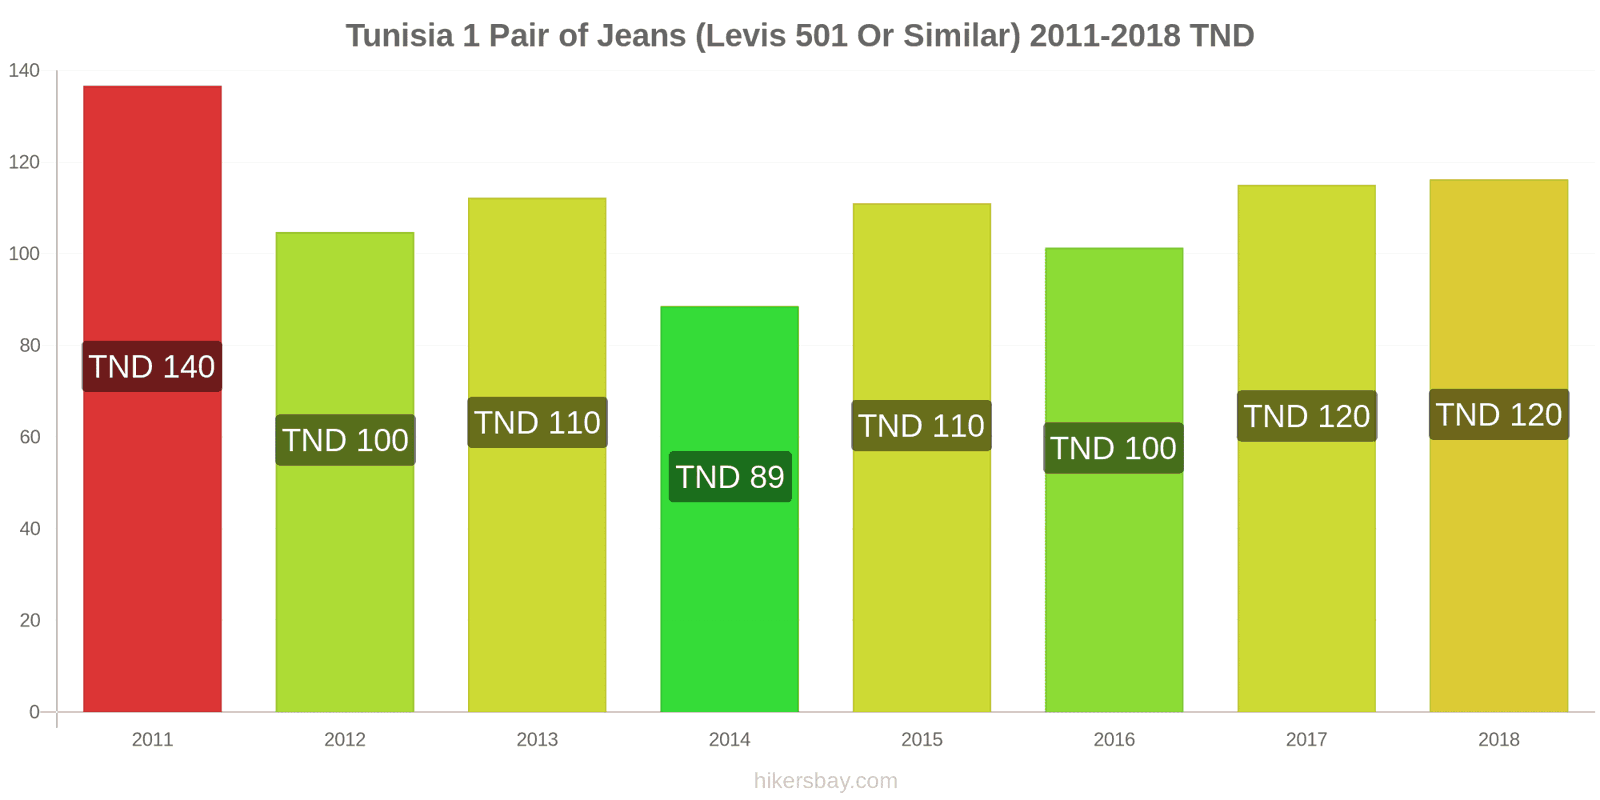 Tunisia price changes 1 pair of jeans (Levis 501 or similar) hikersbay.com